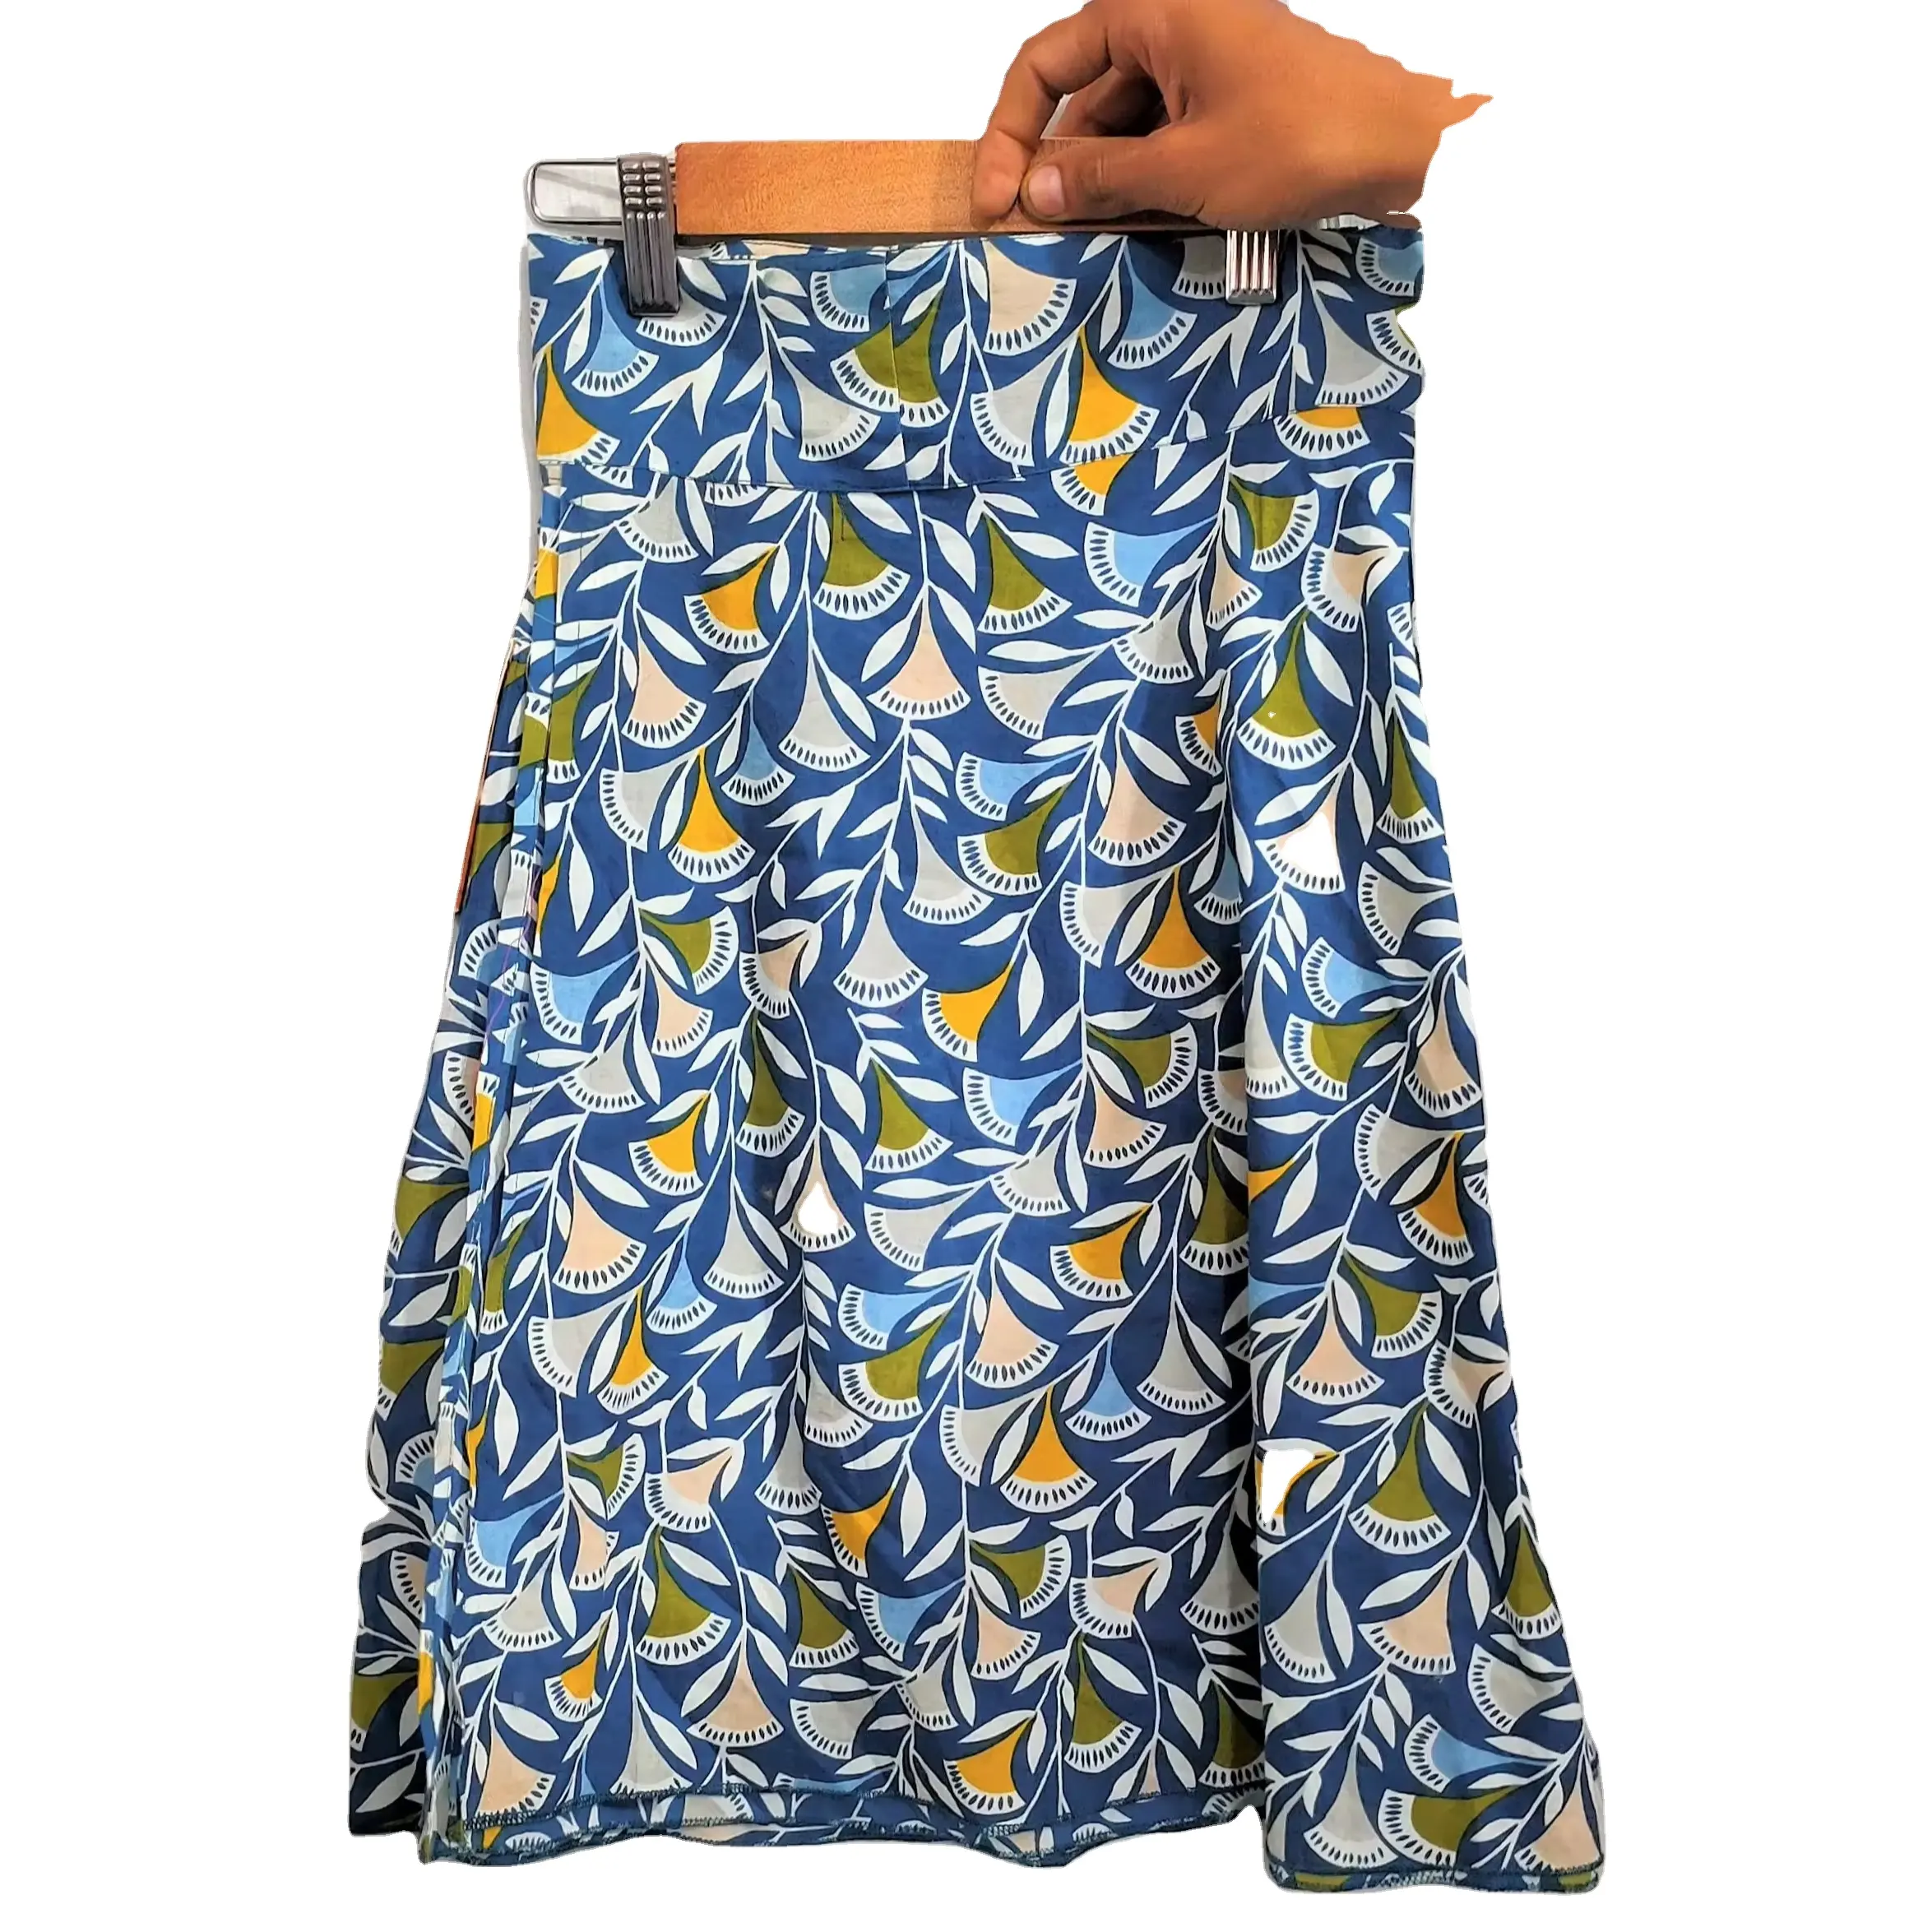 New Fashion Ladies Cotton Wrap Skirt Latest Maxy Print Design with Belt Casual Style for Summer Beachwear for Women